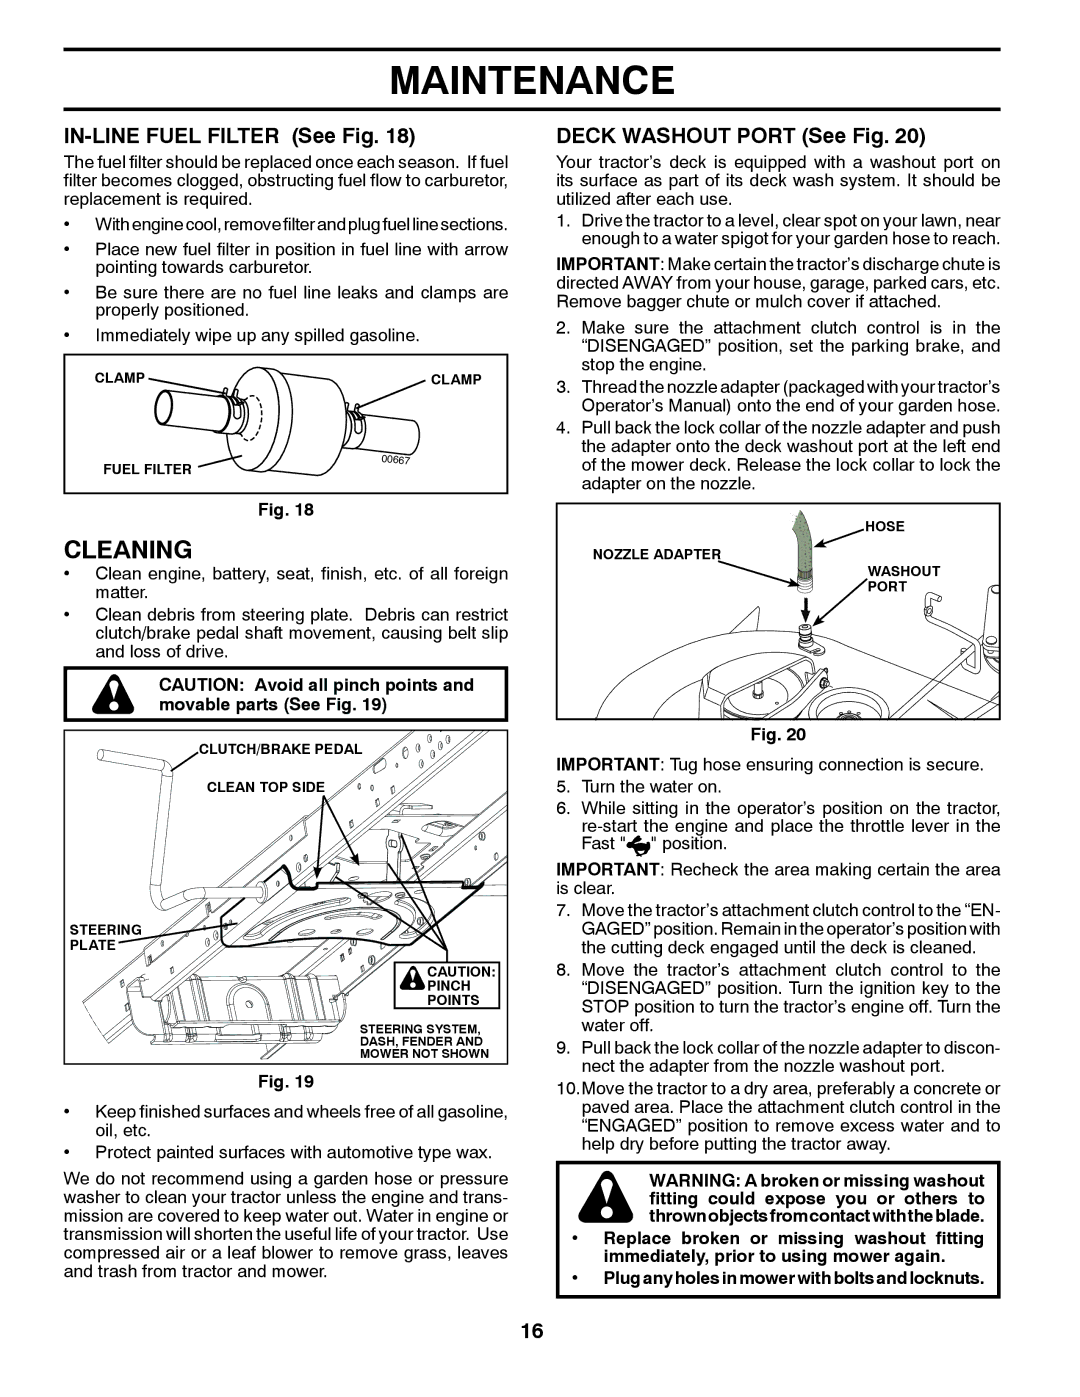 Husqvarna 917.28961 owner manual Cleaning, IN-LINE Fuel Filter See Fig, Deck Washout Port See Fig 